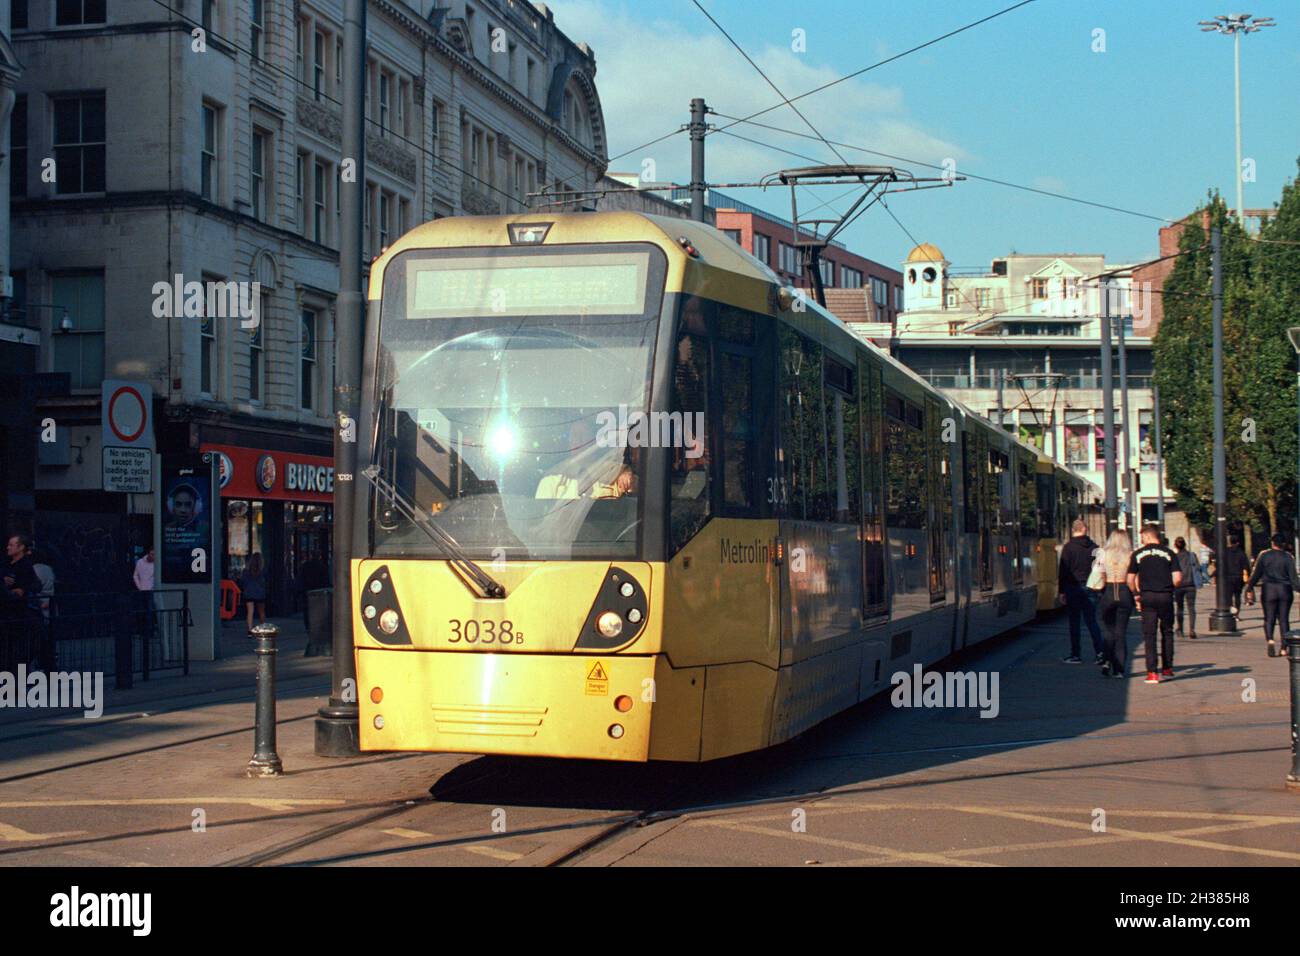 Manchester, UK - September 2021:  A Manchester Metrolink tram (Bombardier M5000, no. 3038) at Piccadilly Gardens. Stock Photo